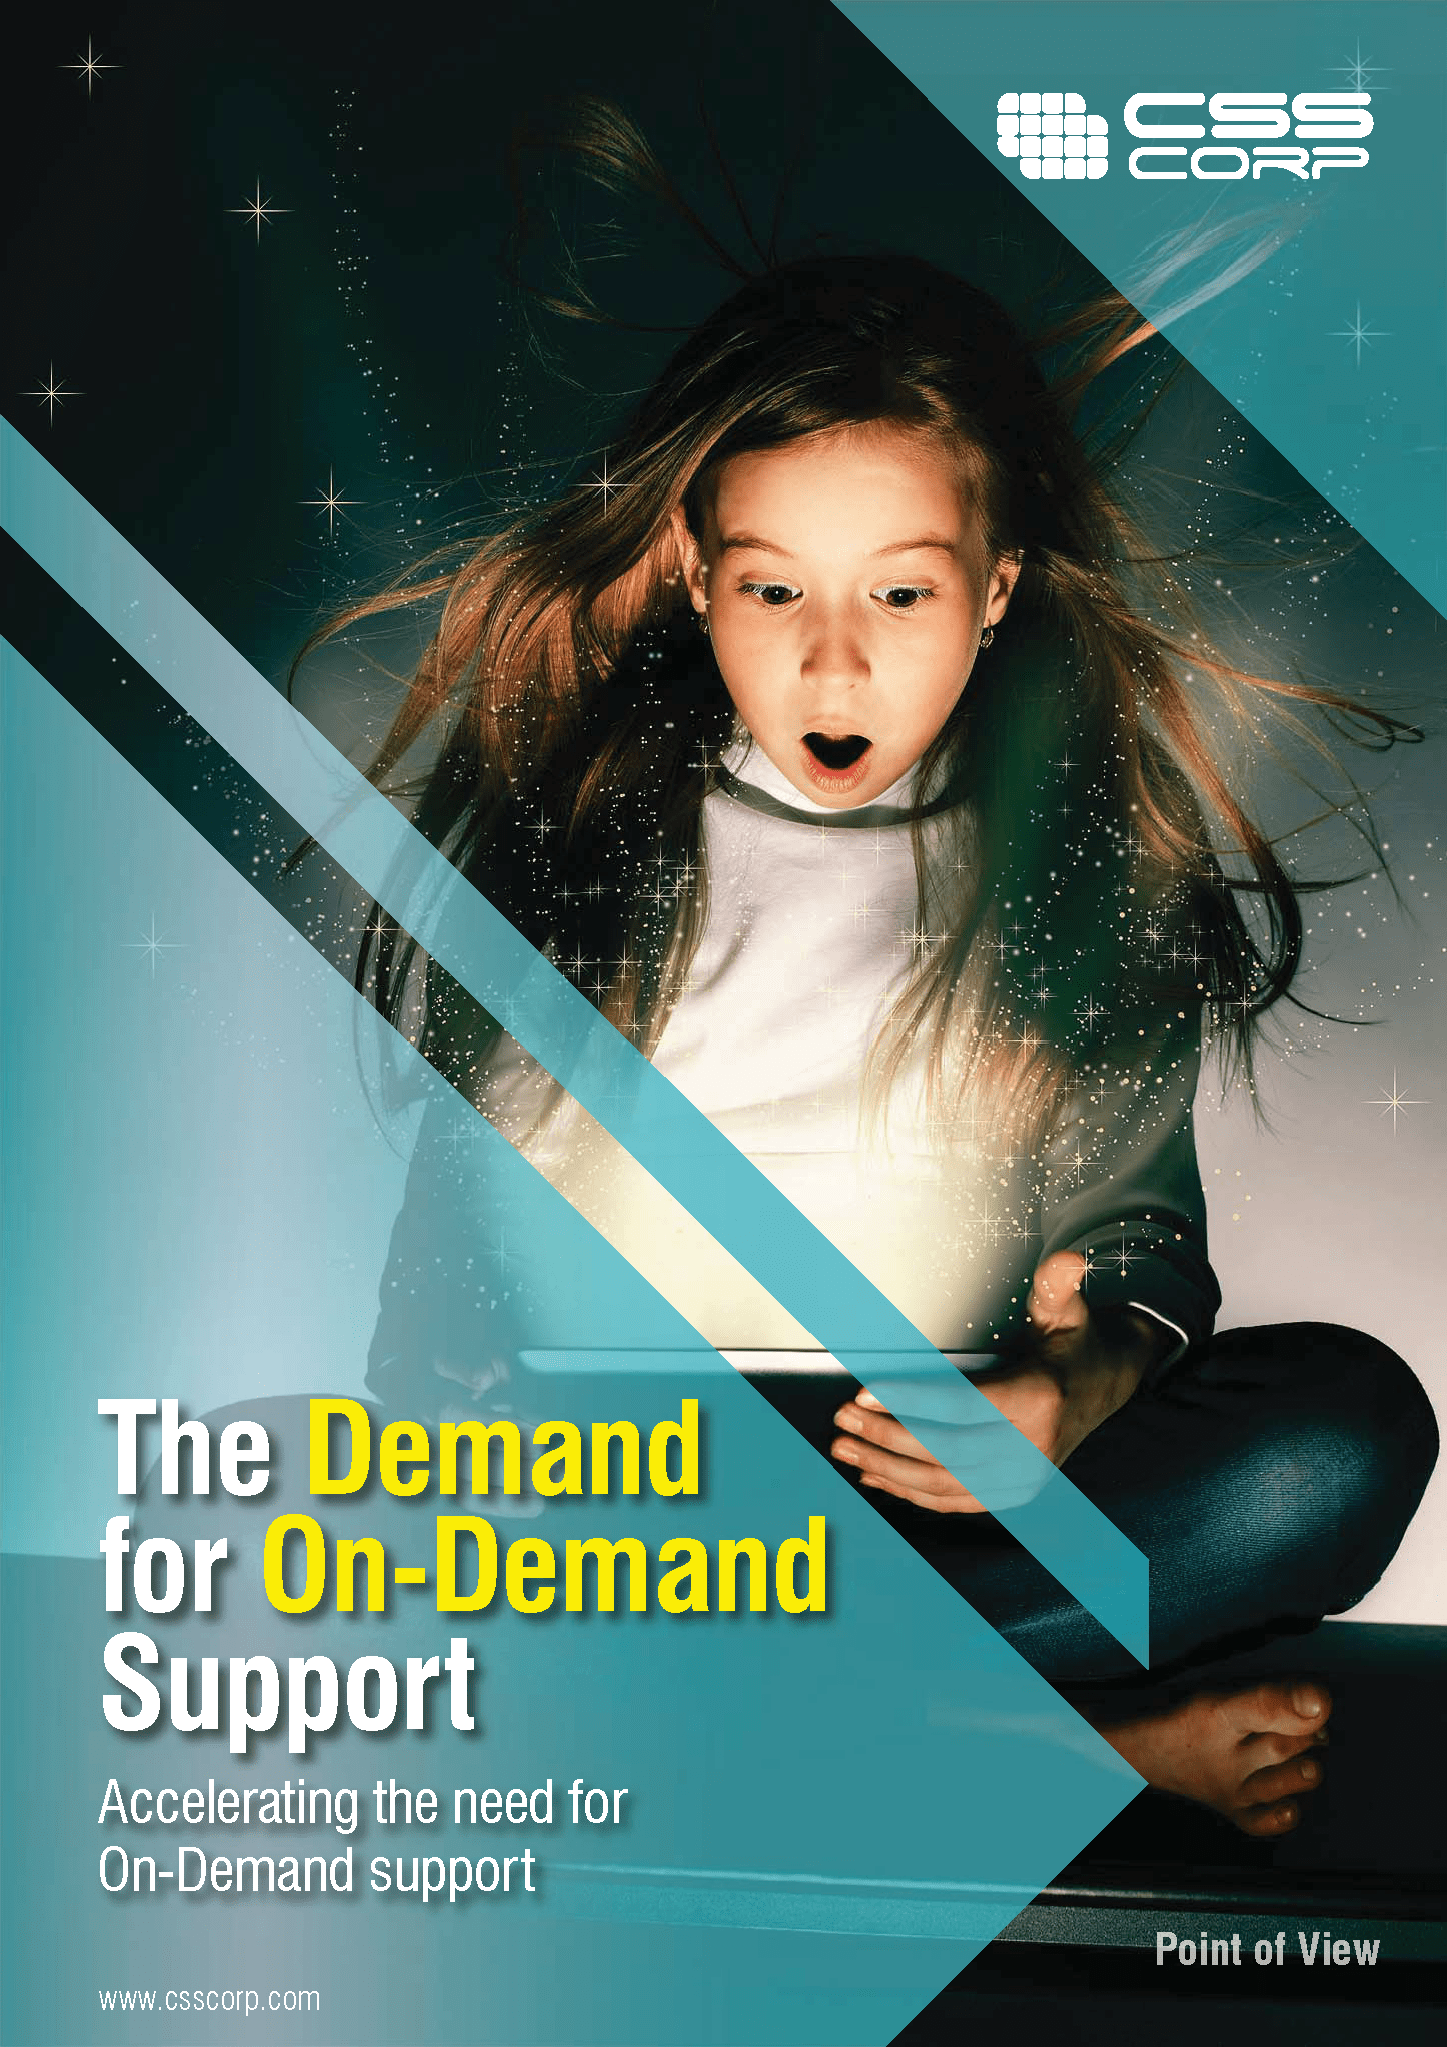 The demand for on-demand support